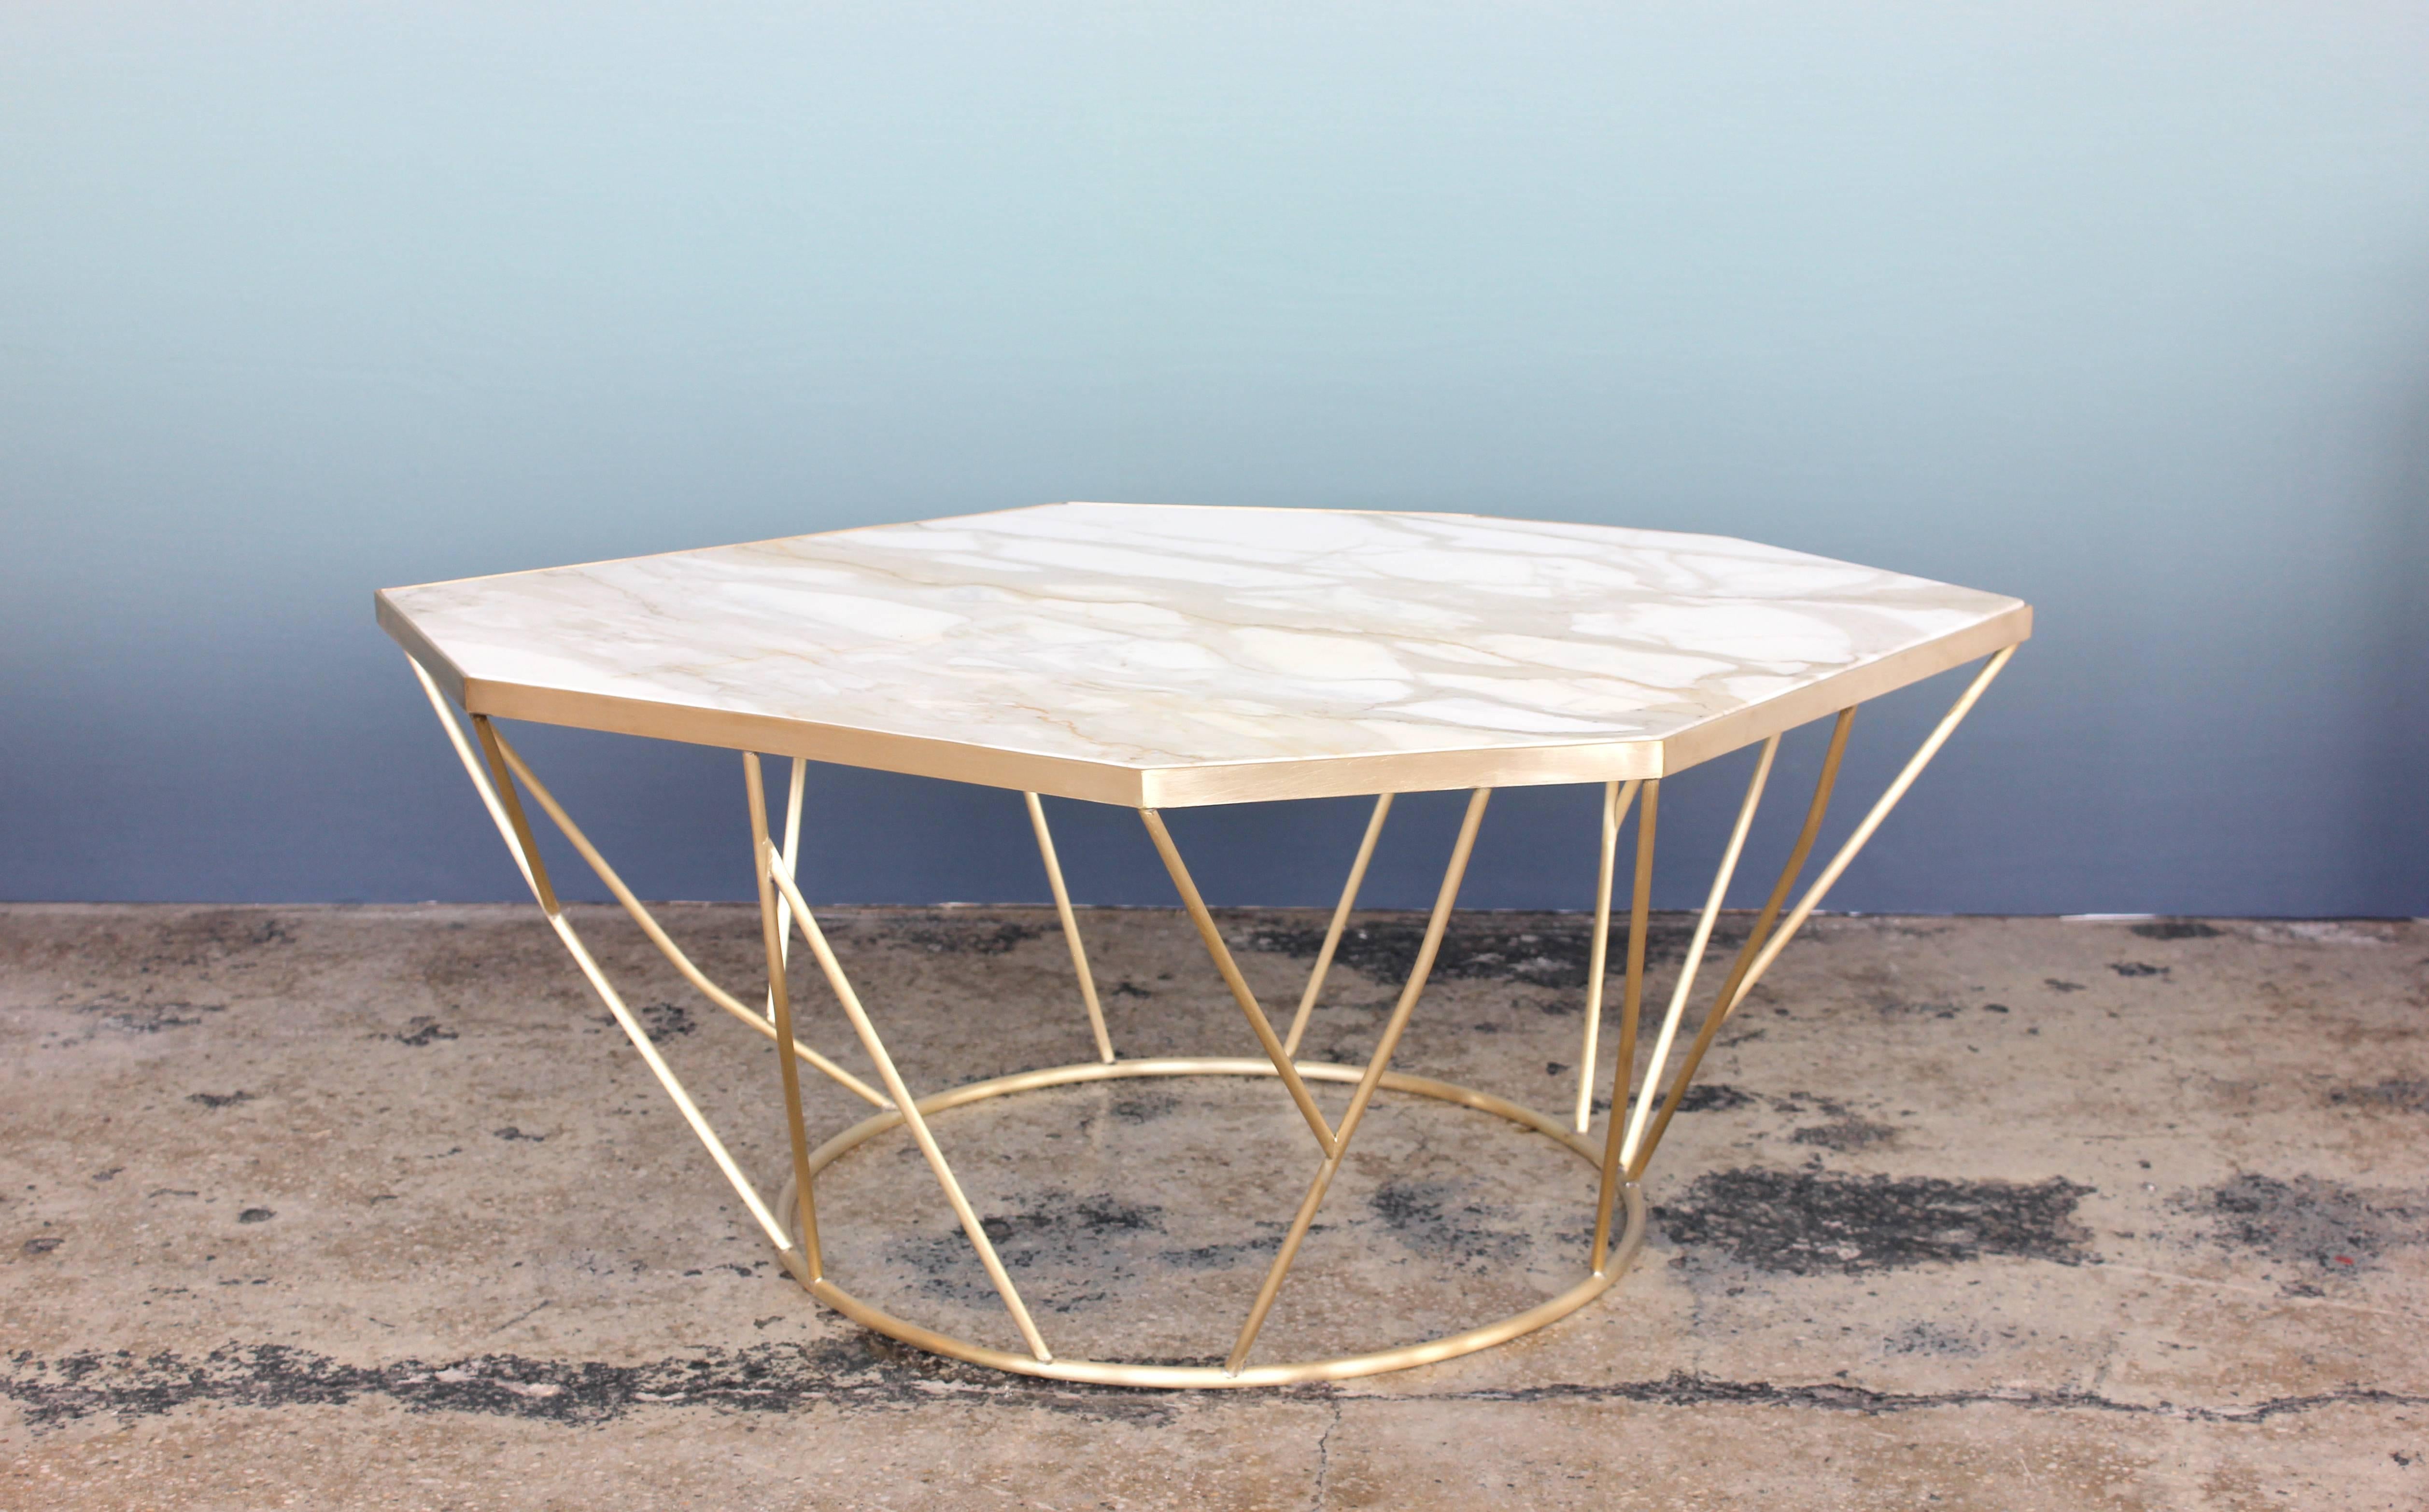 American Facet Sculptural Cocktail Table in Satin Bronze with Inset Honed Marble Top. For Sale